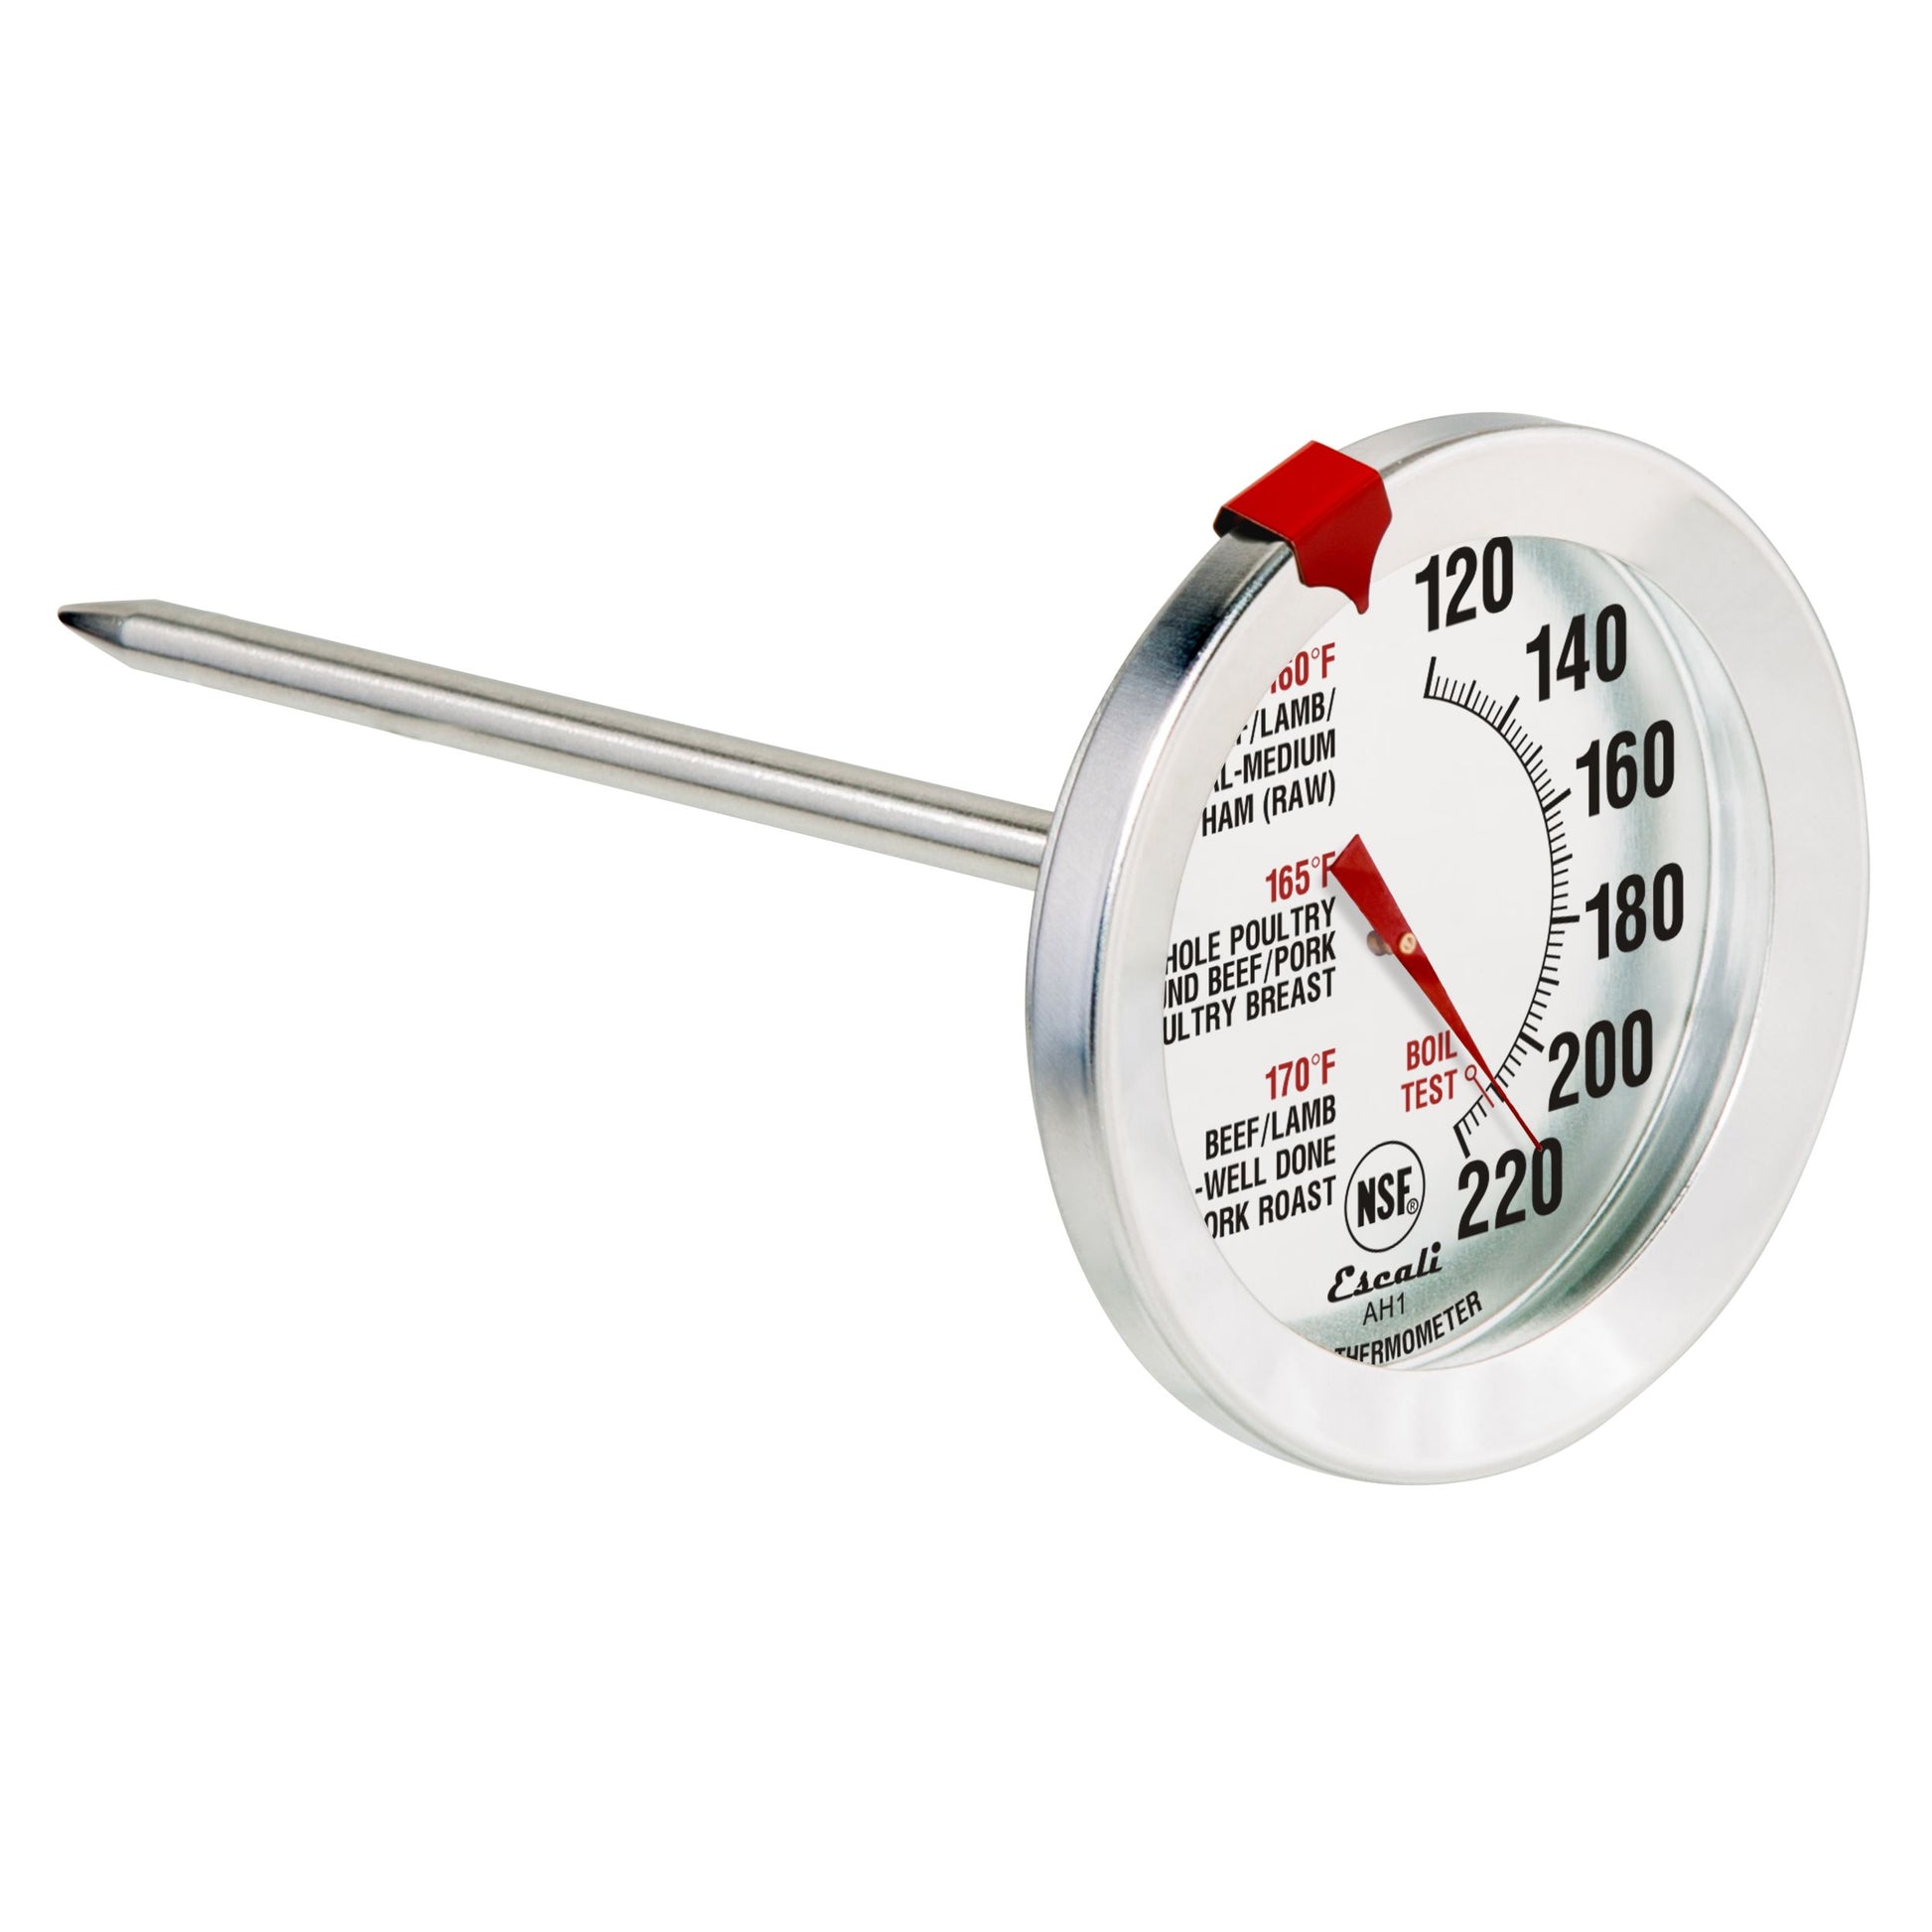 ANNSEA SINARDO Meat Thermometer for Oven T731, BBQ Thermometer, Oven Safe,  Large 2.5-Inch Easy-Read Face, Stainless Steel Stem and Housing